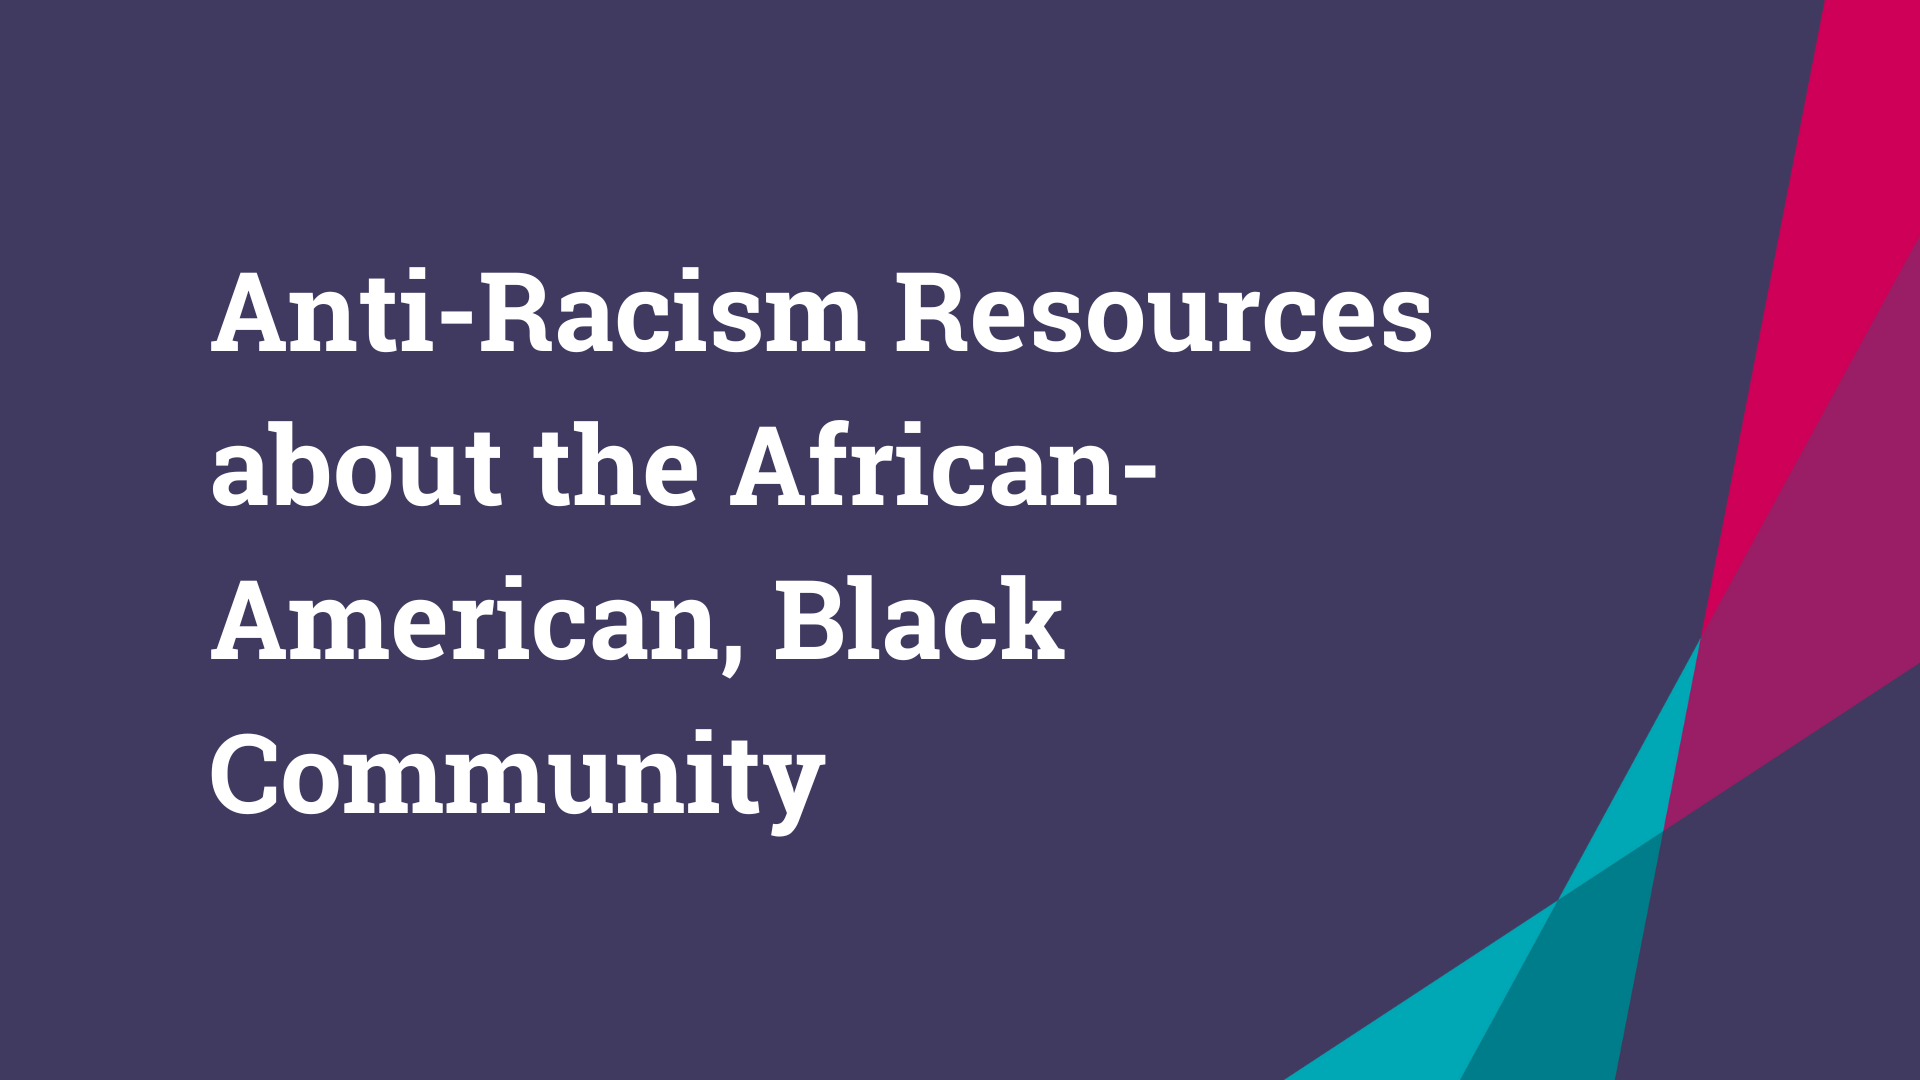 Anti-Racism Resources for African Americans